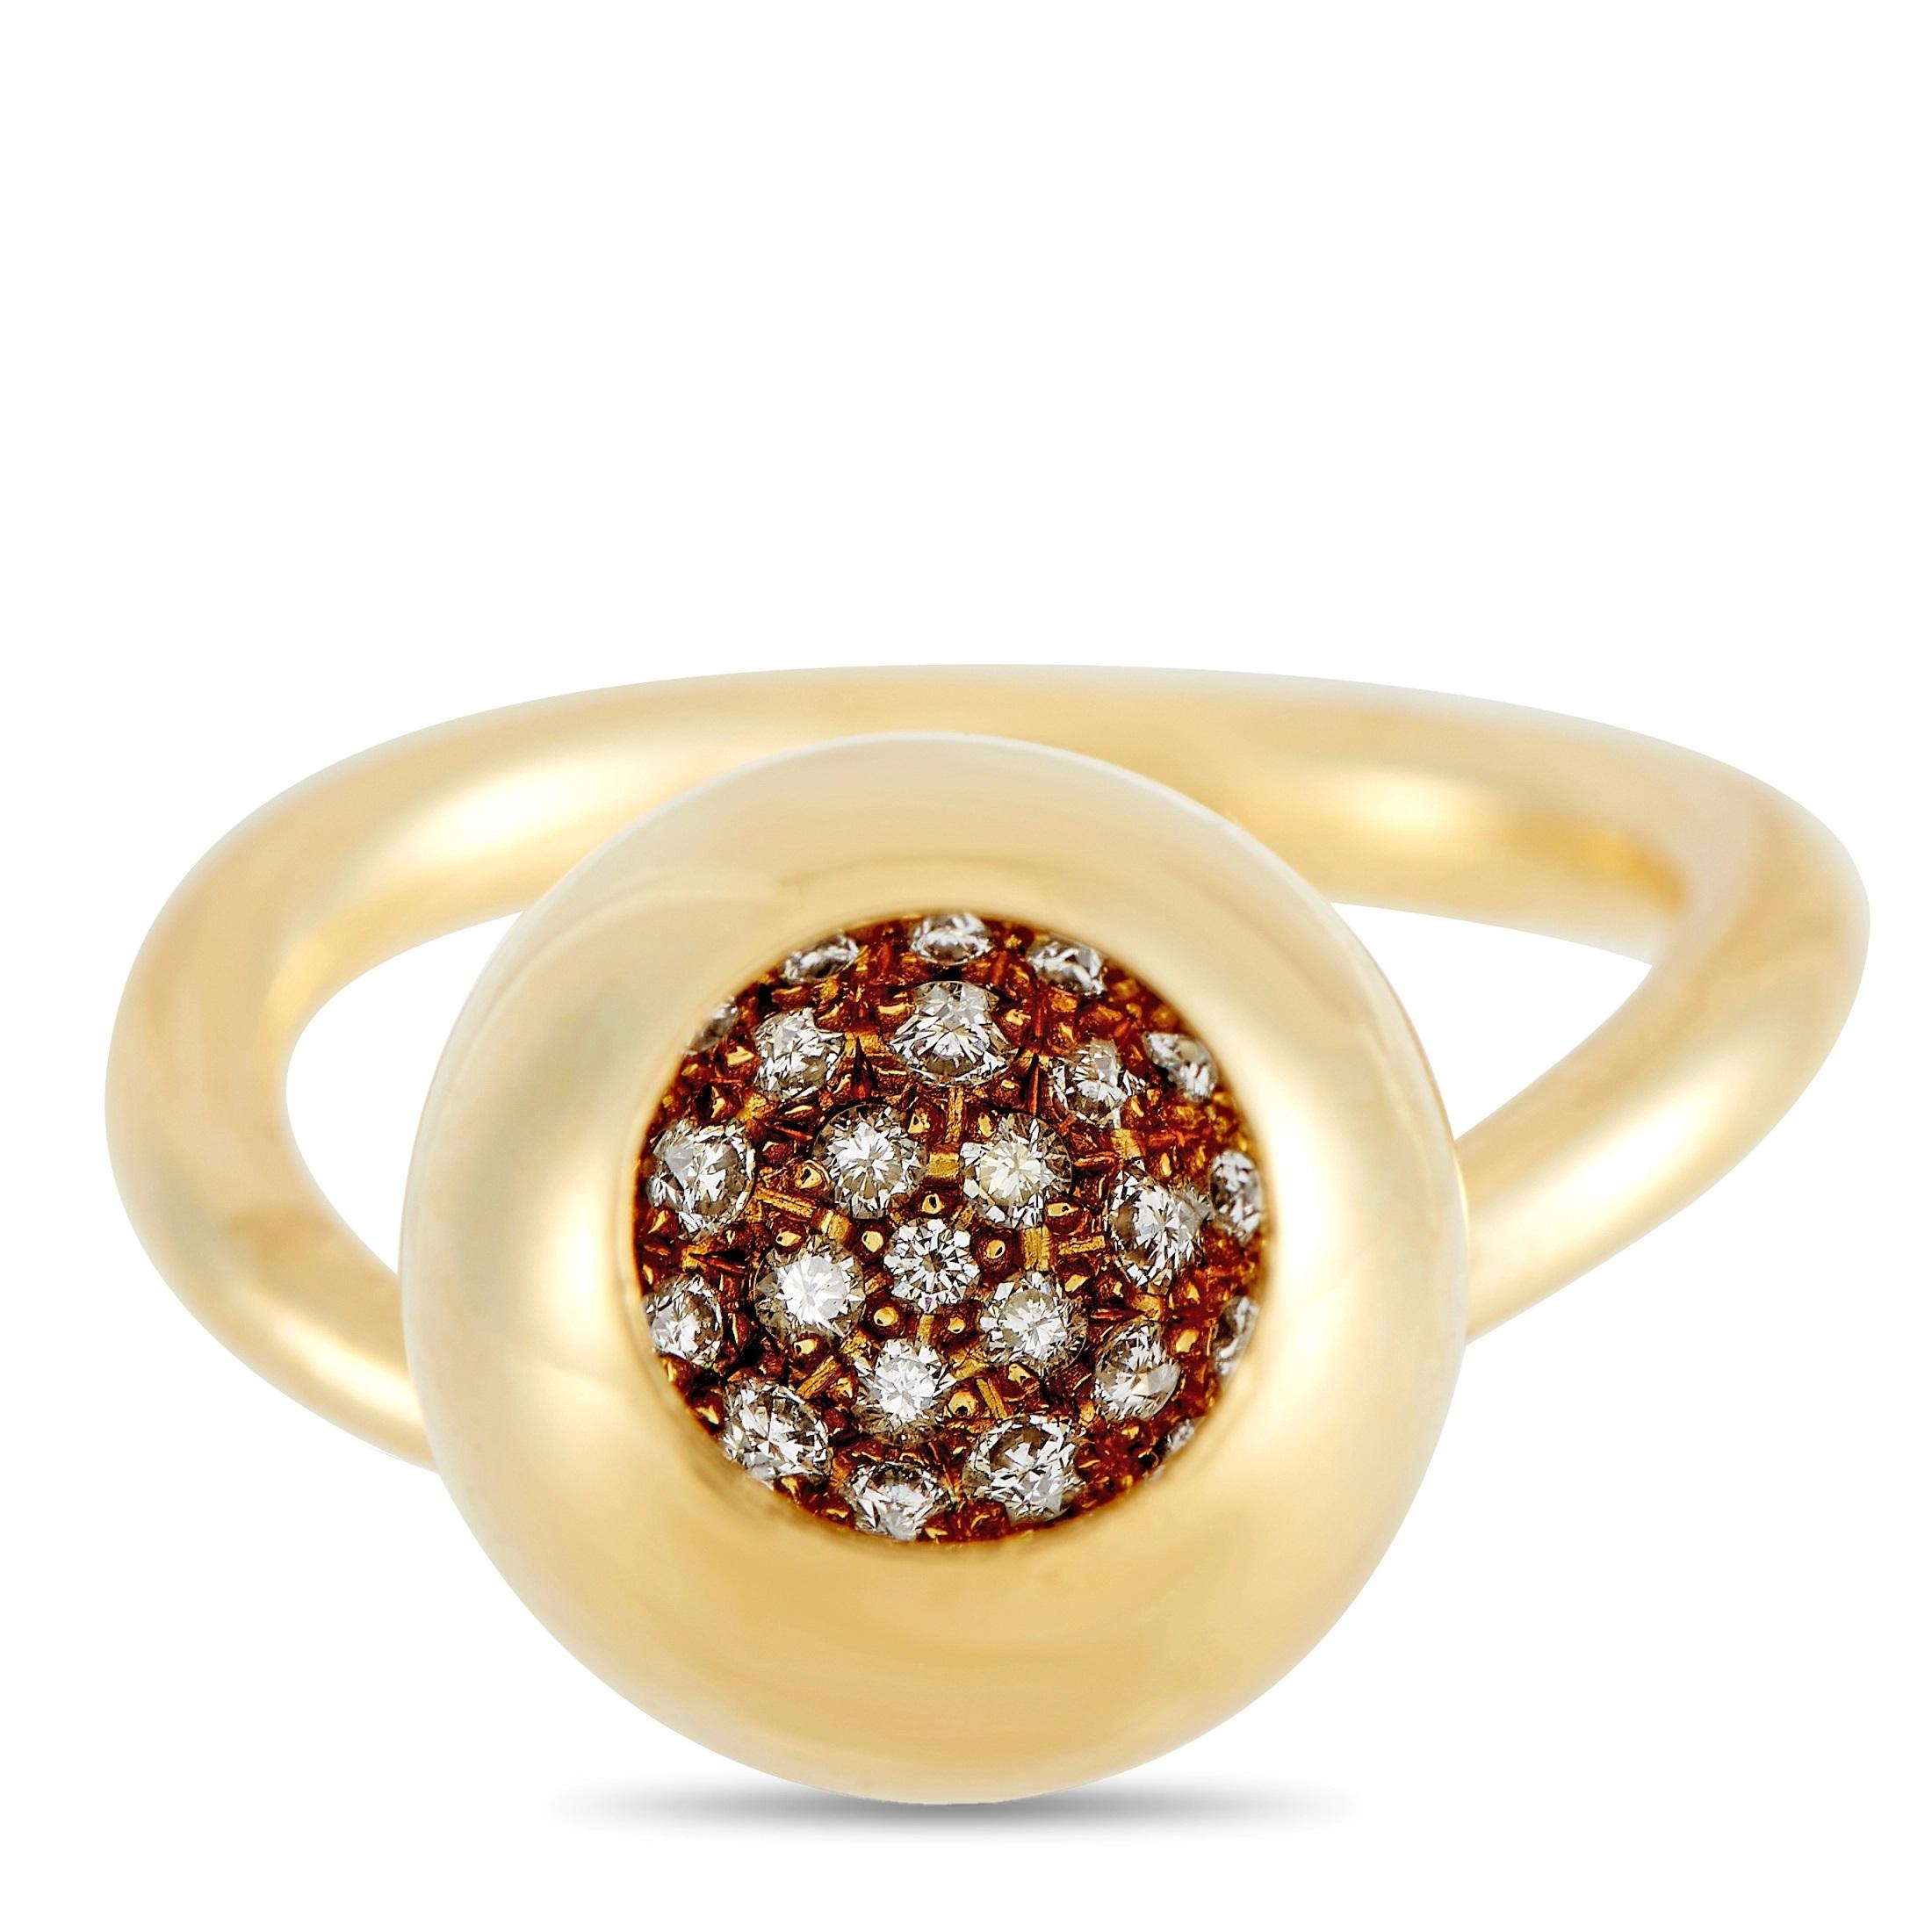 This spectacular 18K Yellow Gold ring is a collaboration between American jewelry designer Jacqueline Rabun and the iconic Georg Jensen brand. Attached to a delicate 3mm band, you’ll find a hanging orb cave that is elevated by inset diamonds